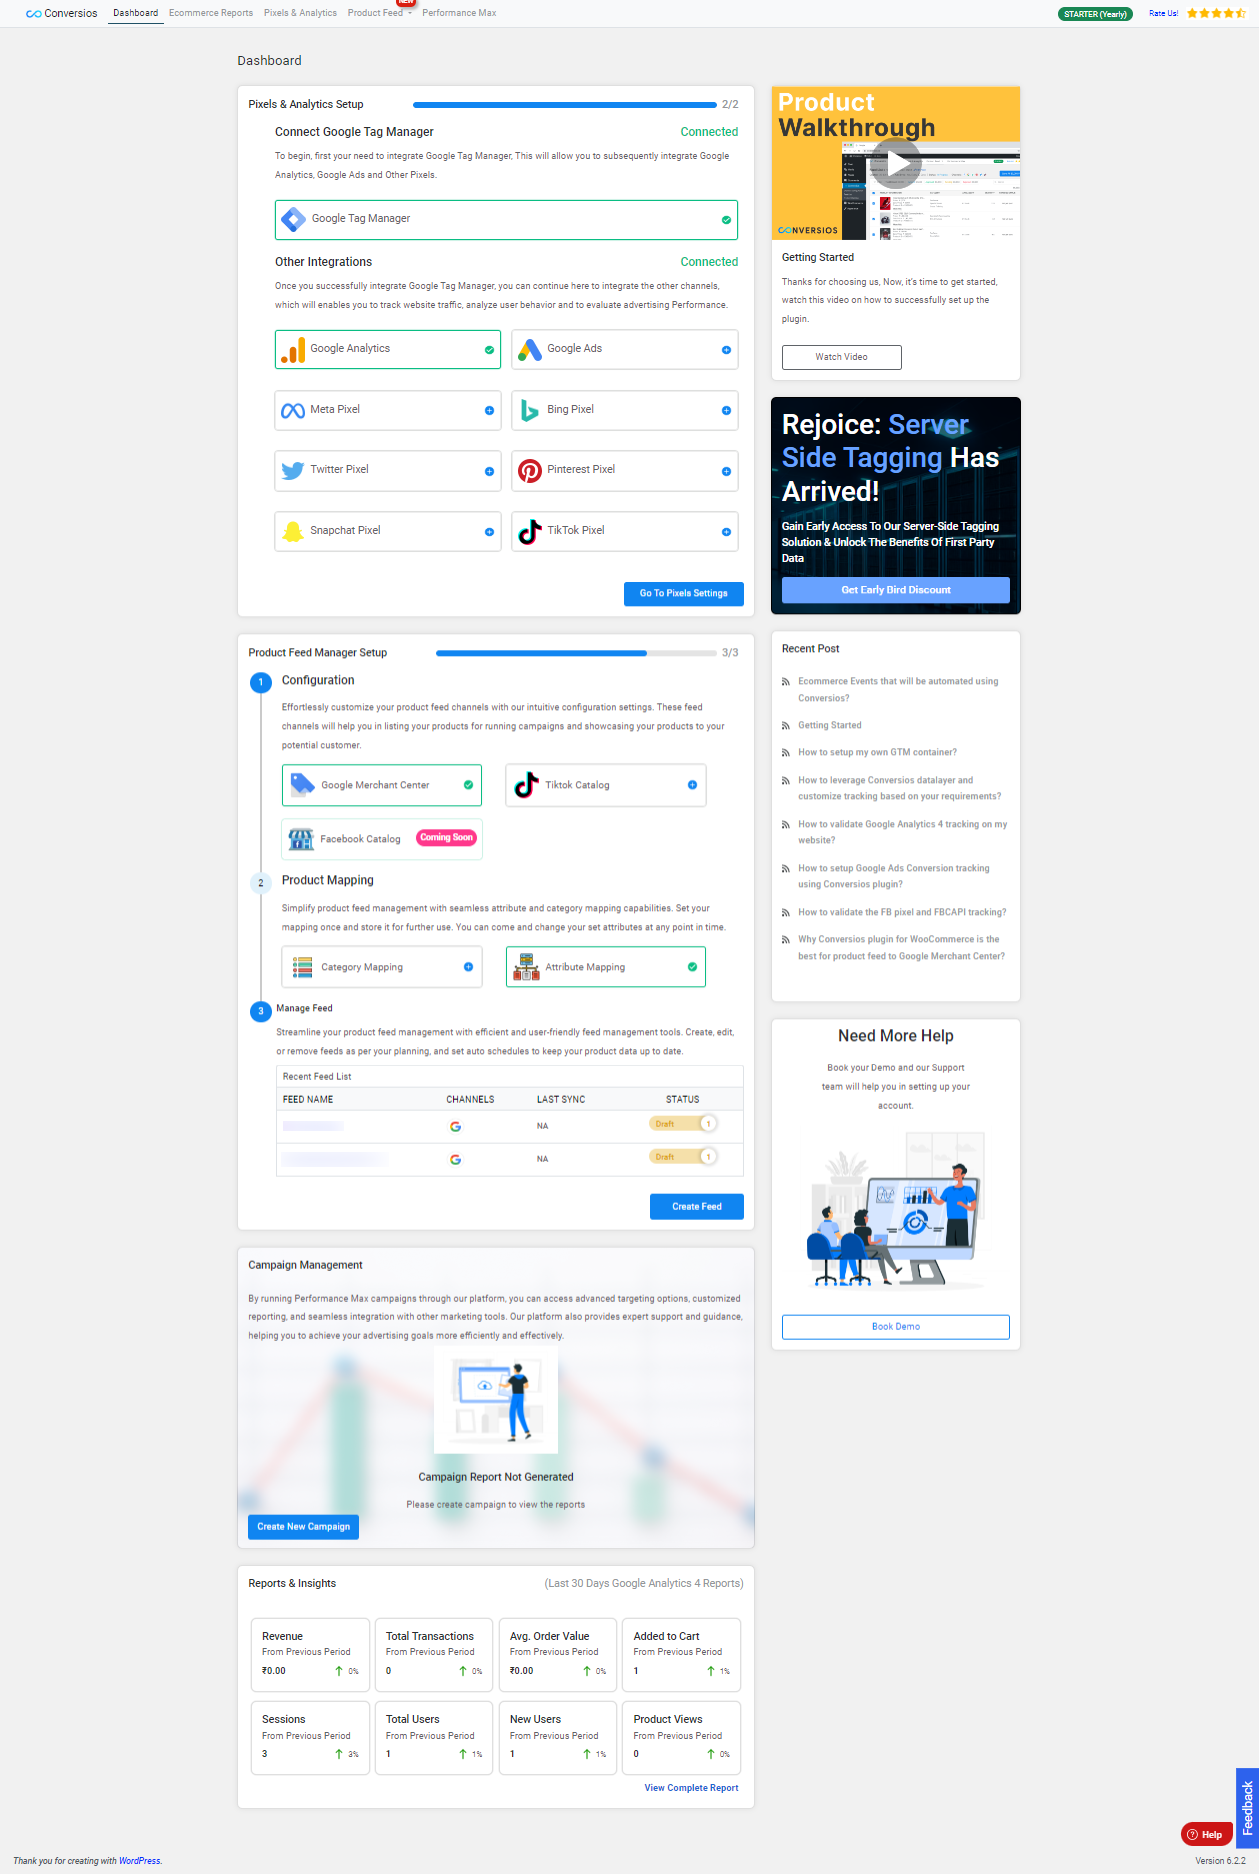 This is the Dashboard screen which shows the status of the Google Tag Manager implementation and setup of the various pixels, the link status of the Google Merchant Center, TikTok catalog, and the latest 2 feeds, and report insights for the running campaigns and the last 30 days' data for GA4